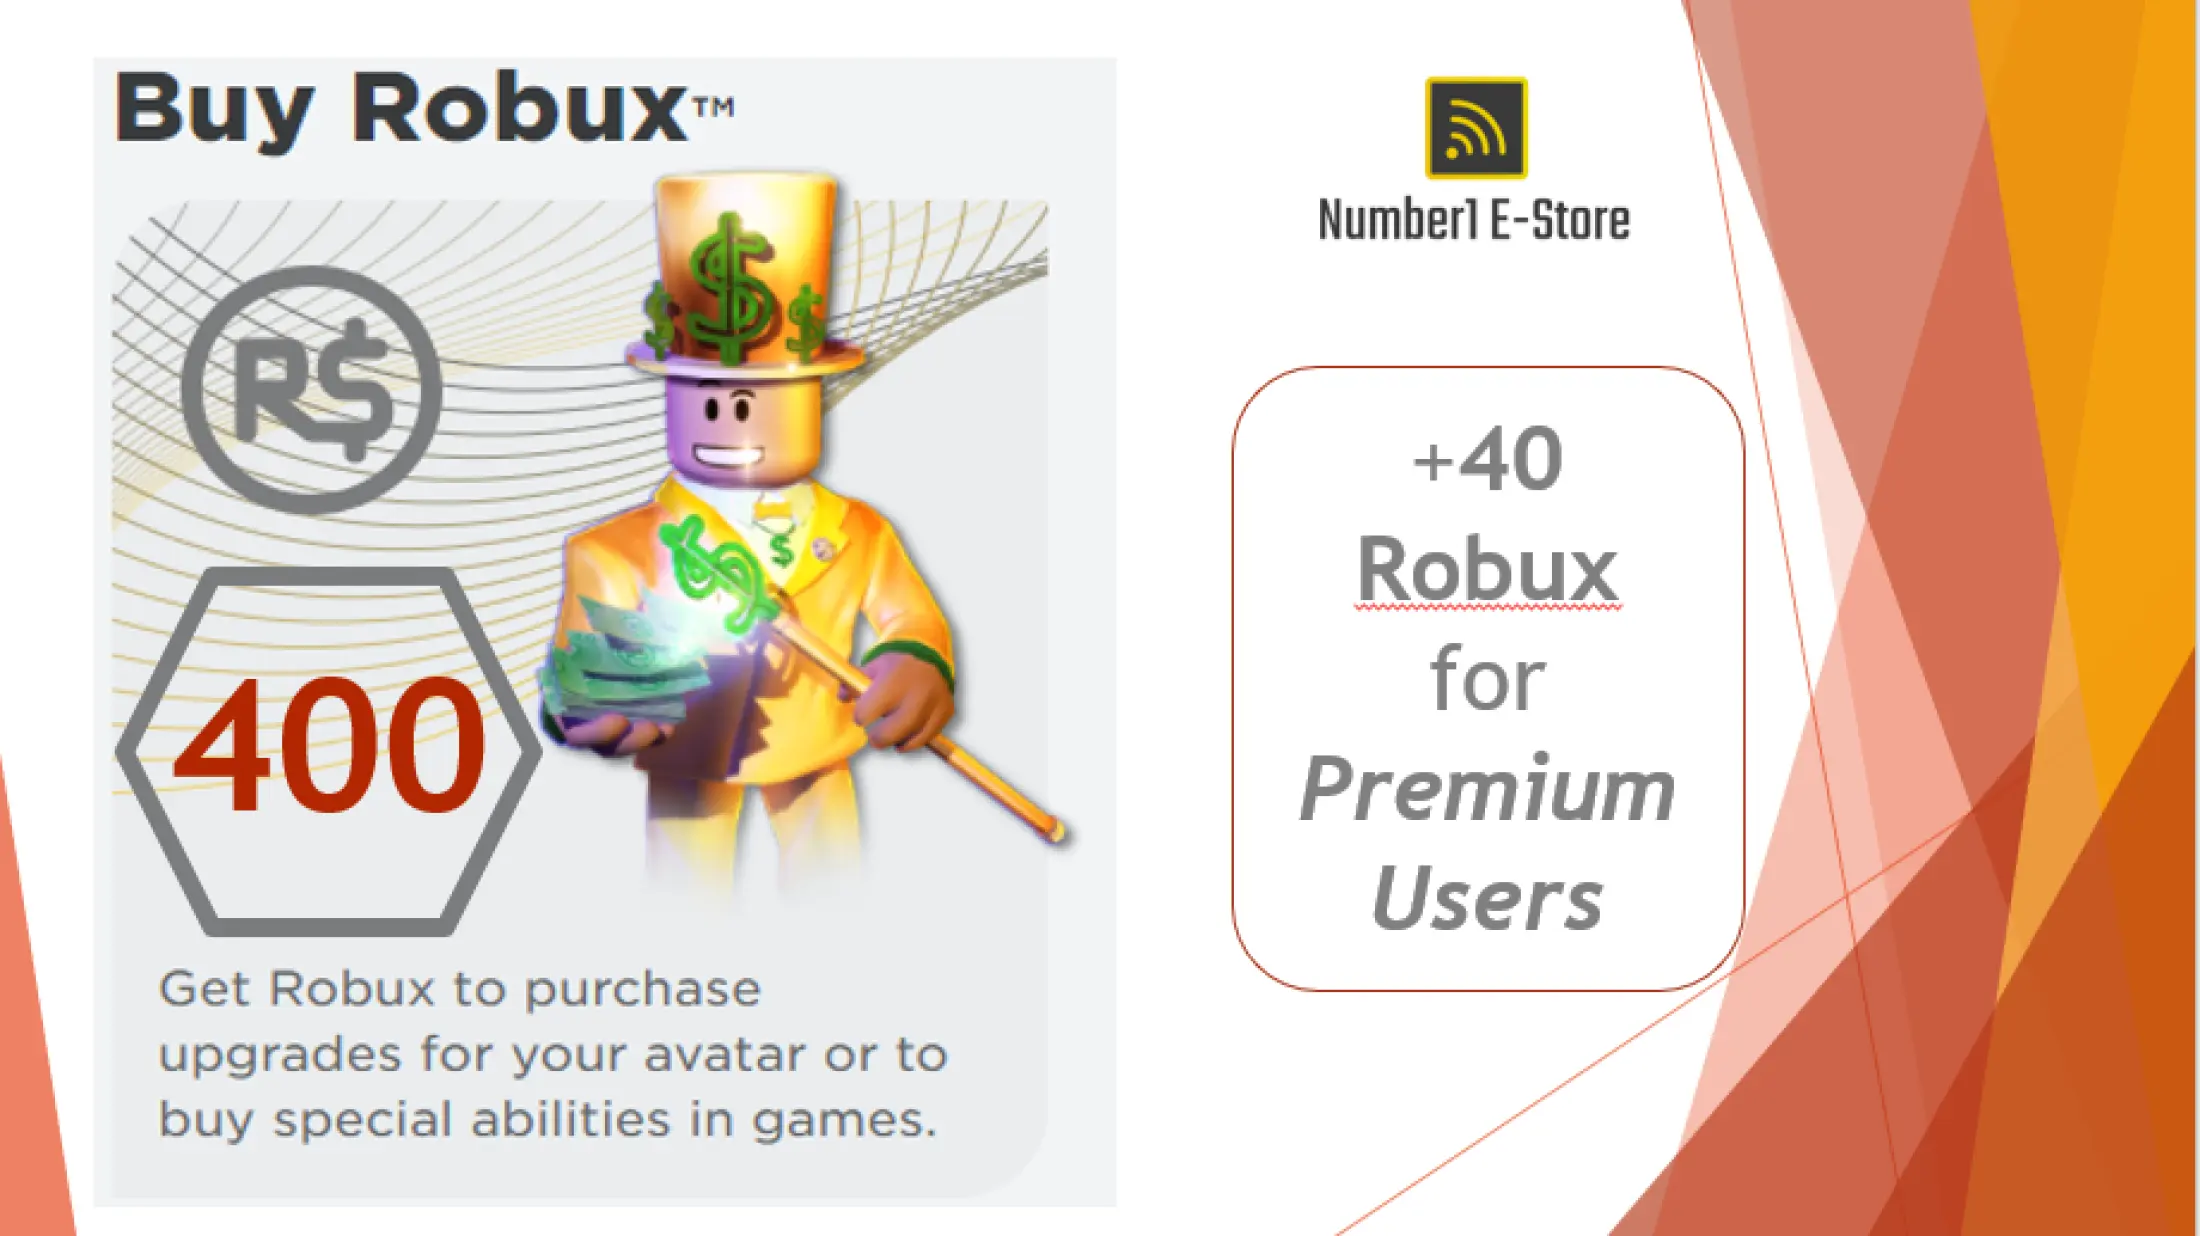 Roblox 400 Robux Direct Top Up 400 Robux This Is Not A Code Or A Card Direct Top Up Only Lazada Ph - how much is robux in pesos